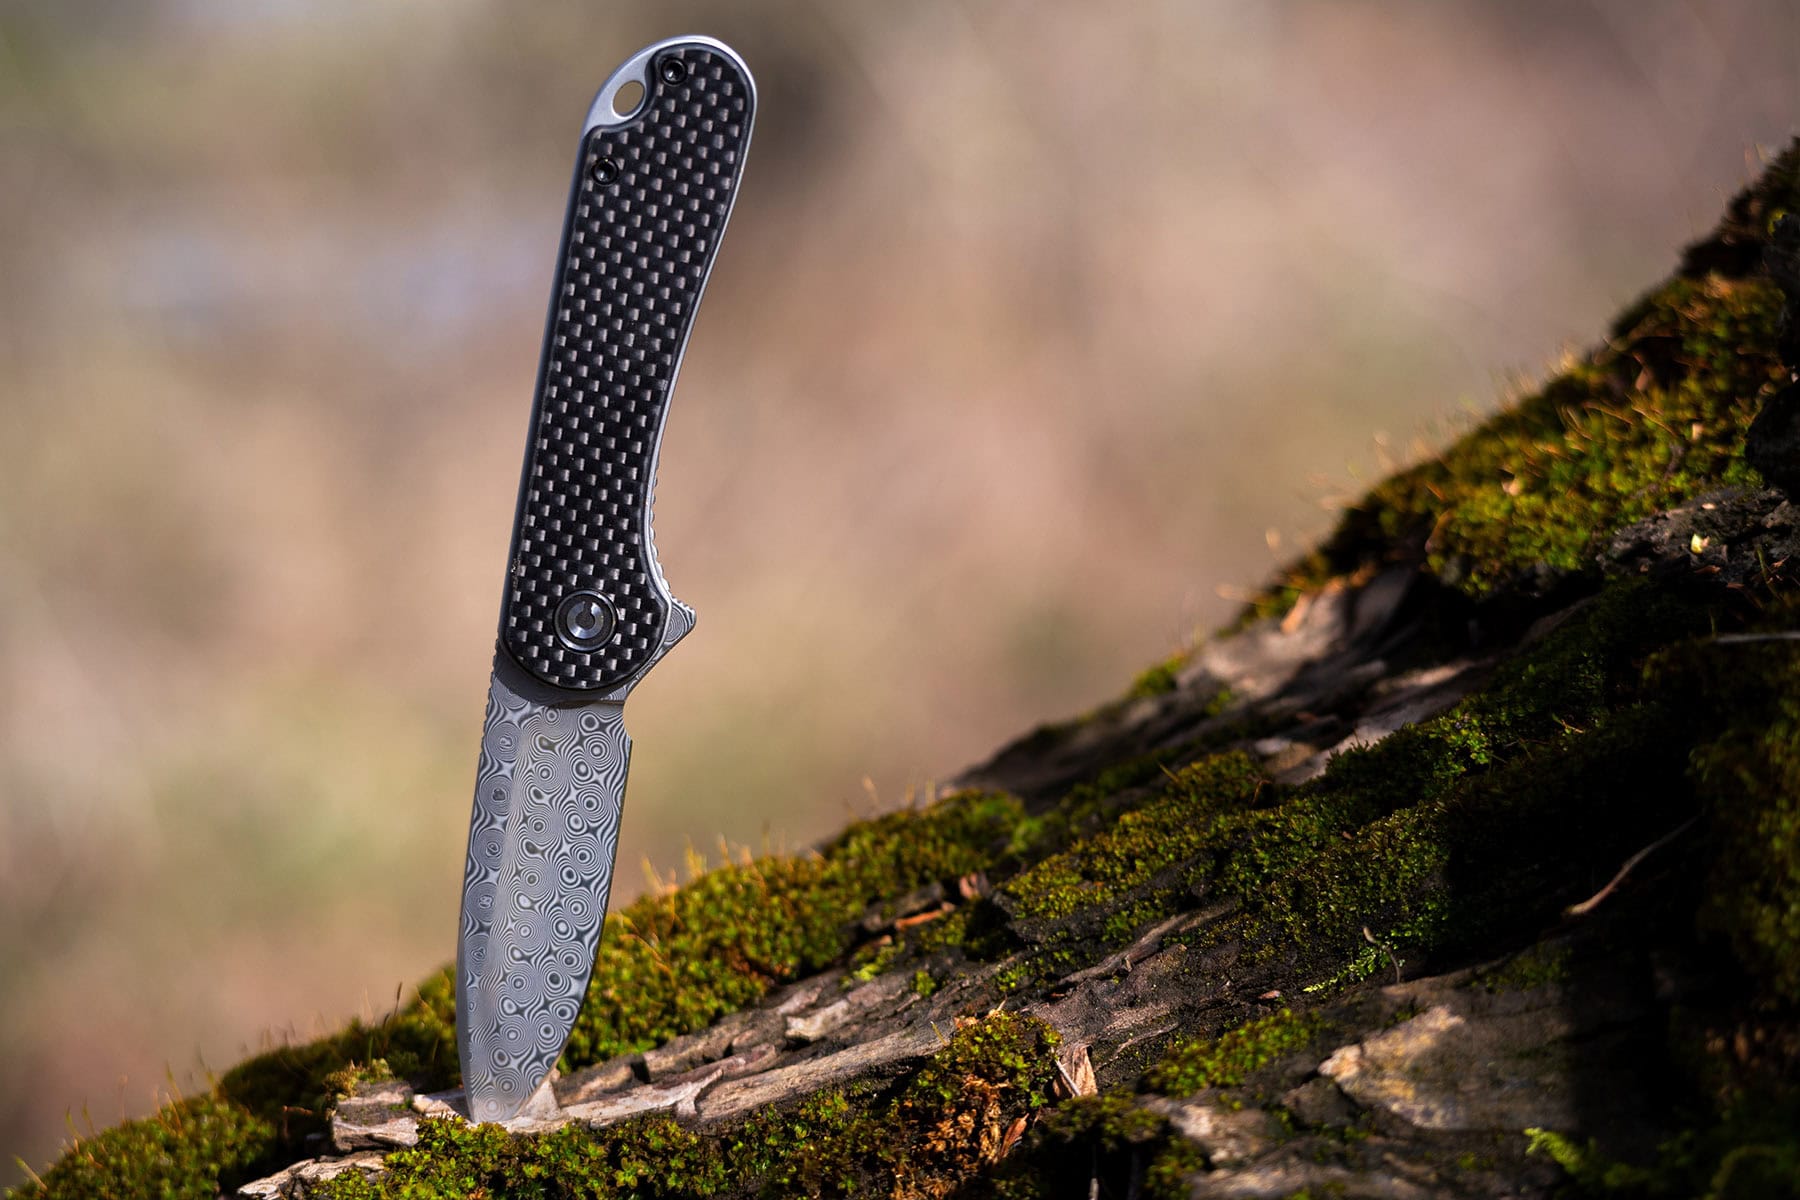 The Civivi Elementum is a classic compact pocket knife. that is a good alternative to the Fast Eddie.